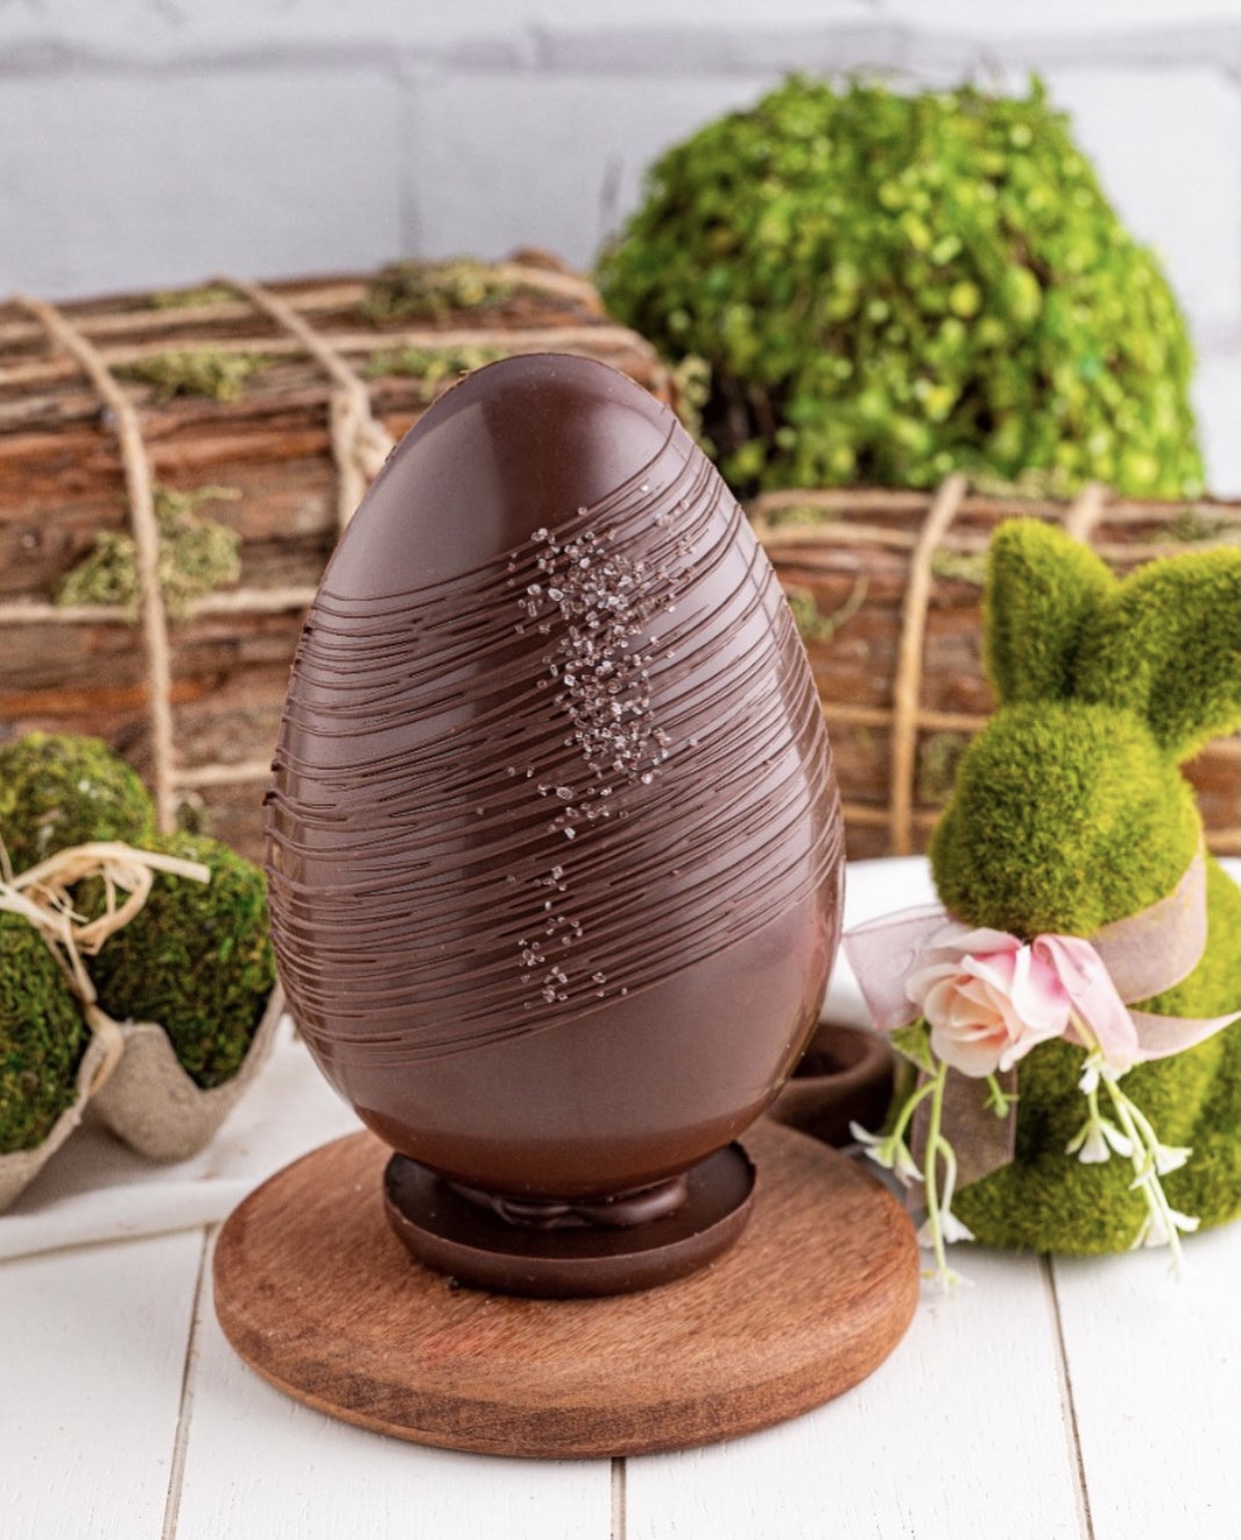 Worlds best Easter Eggs FREE Worldwide delivery   Slaylebrity